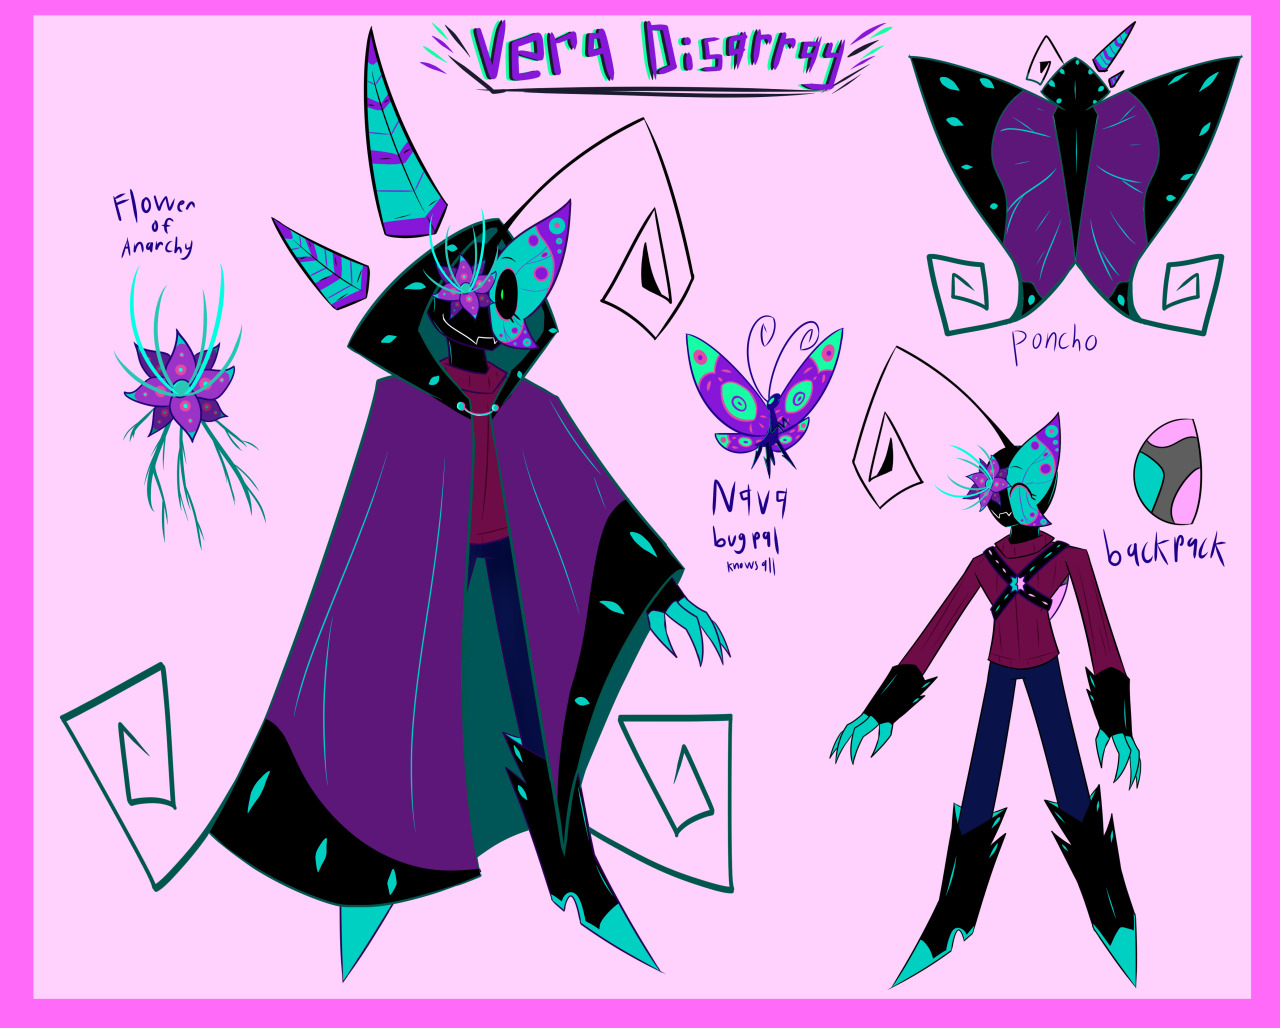 HERE SHE IS!!! VERA DISARRAY!!! I redesigned her and I really like how it turned out. She’s her own thing and isn’t related to any varriant. Though you can probably tell I really dove into a few irken looks. #oc#vera#vera disarray#ref#drawing#my art